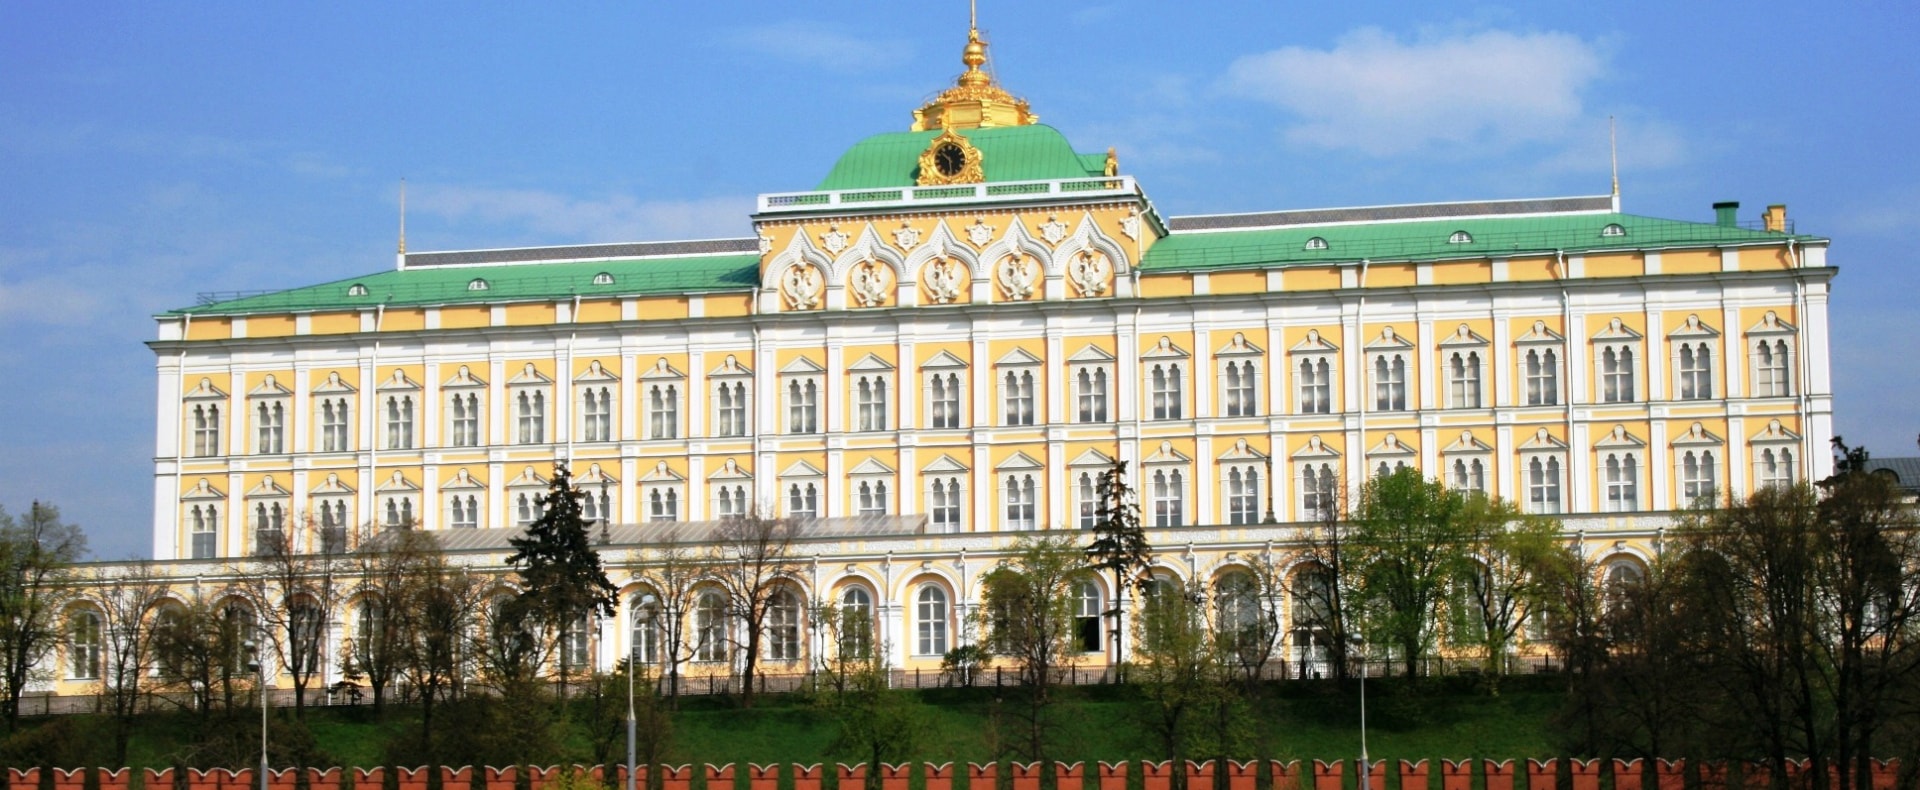 The Grand Palace in Kremlin, Moscow